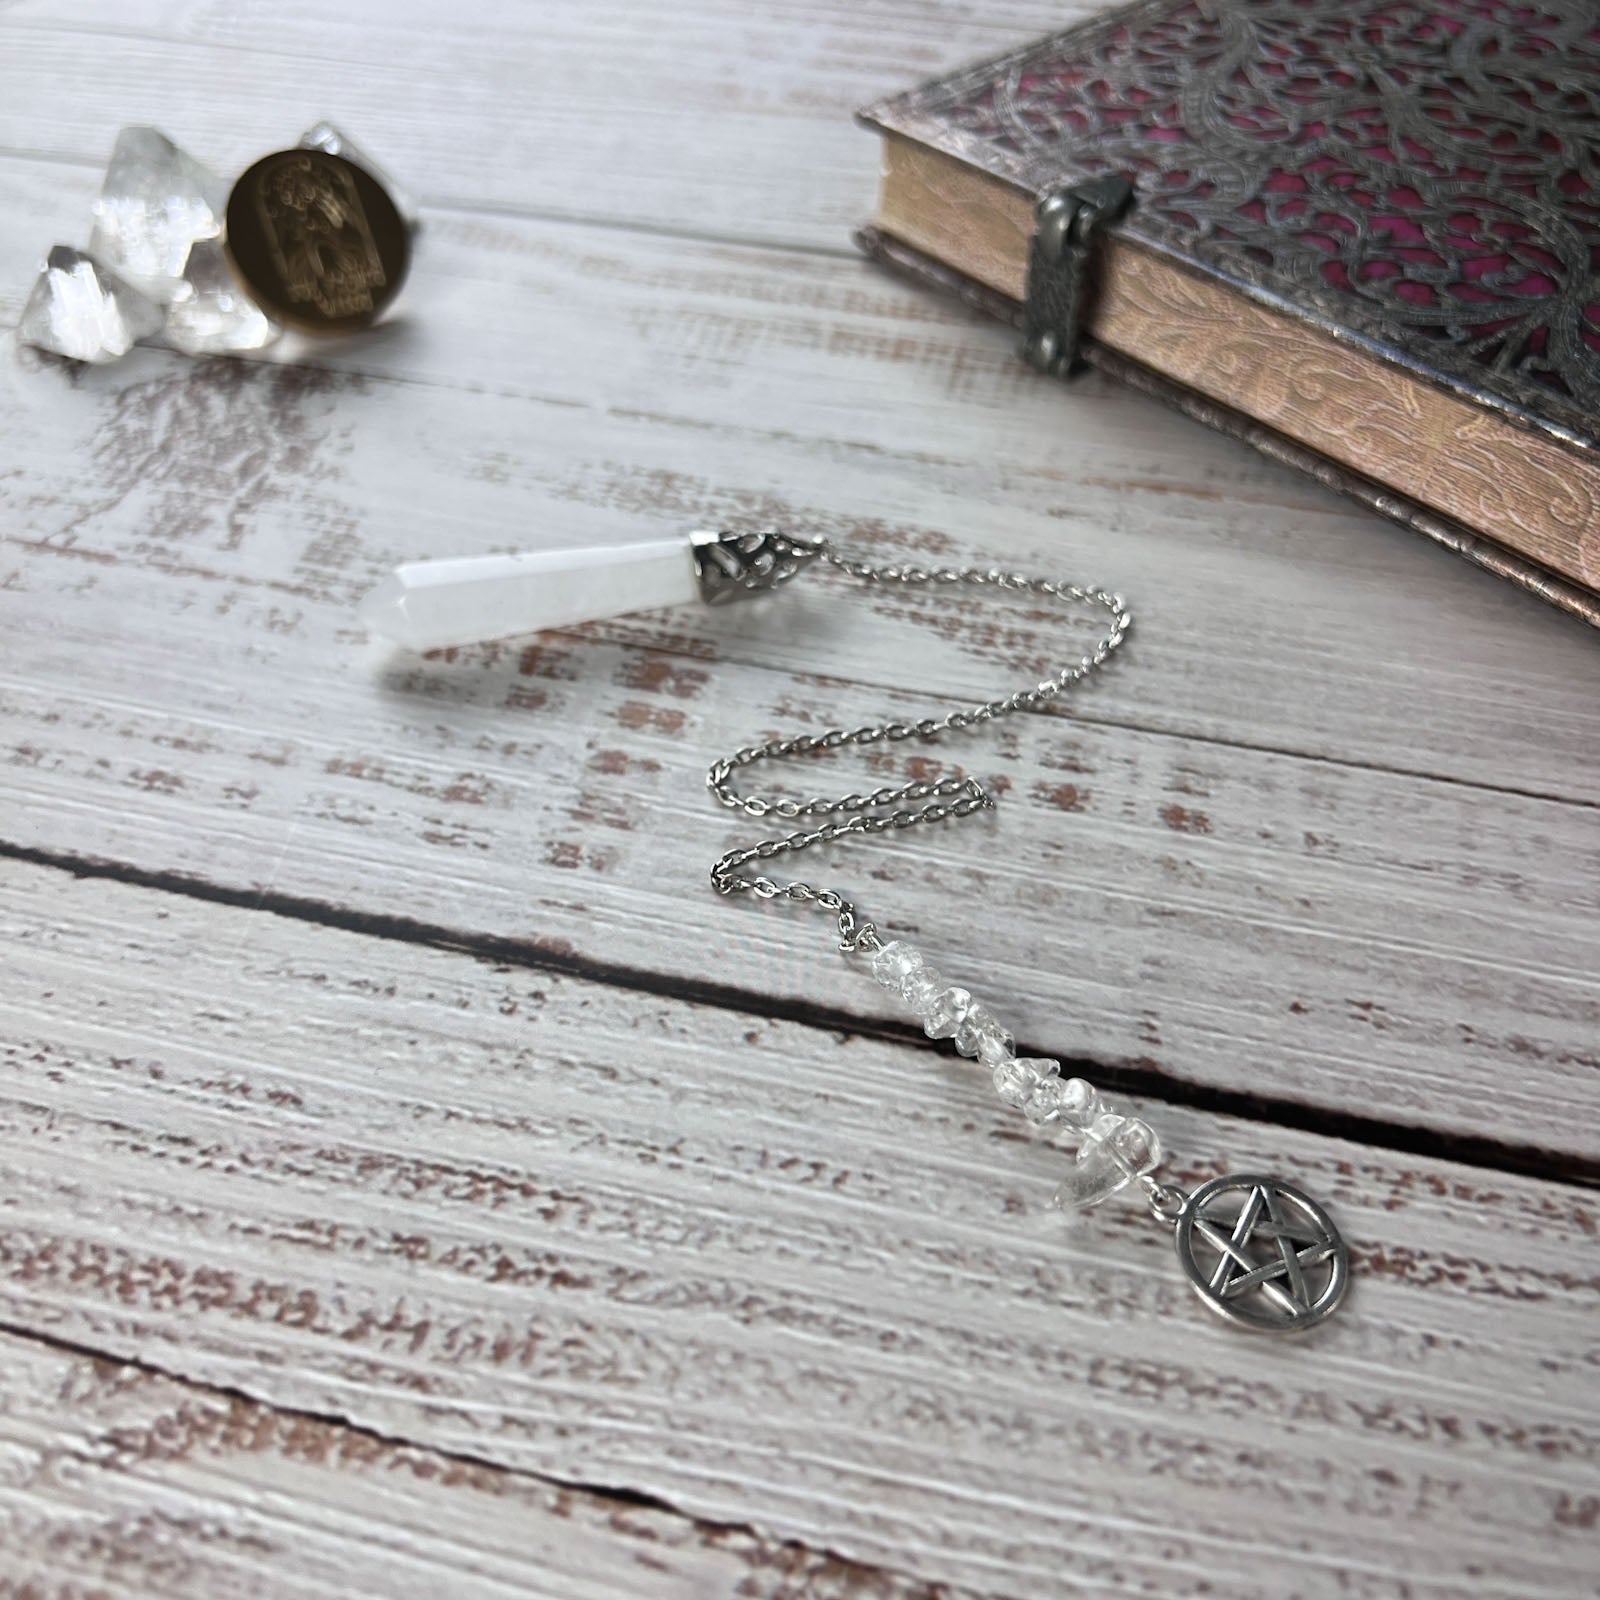 Clear quartz and pentacle pendulum - The French Witch shop